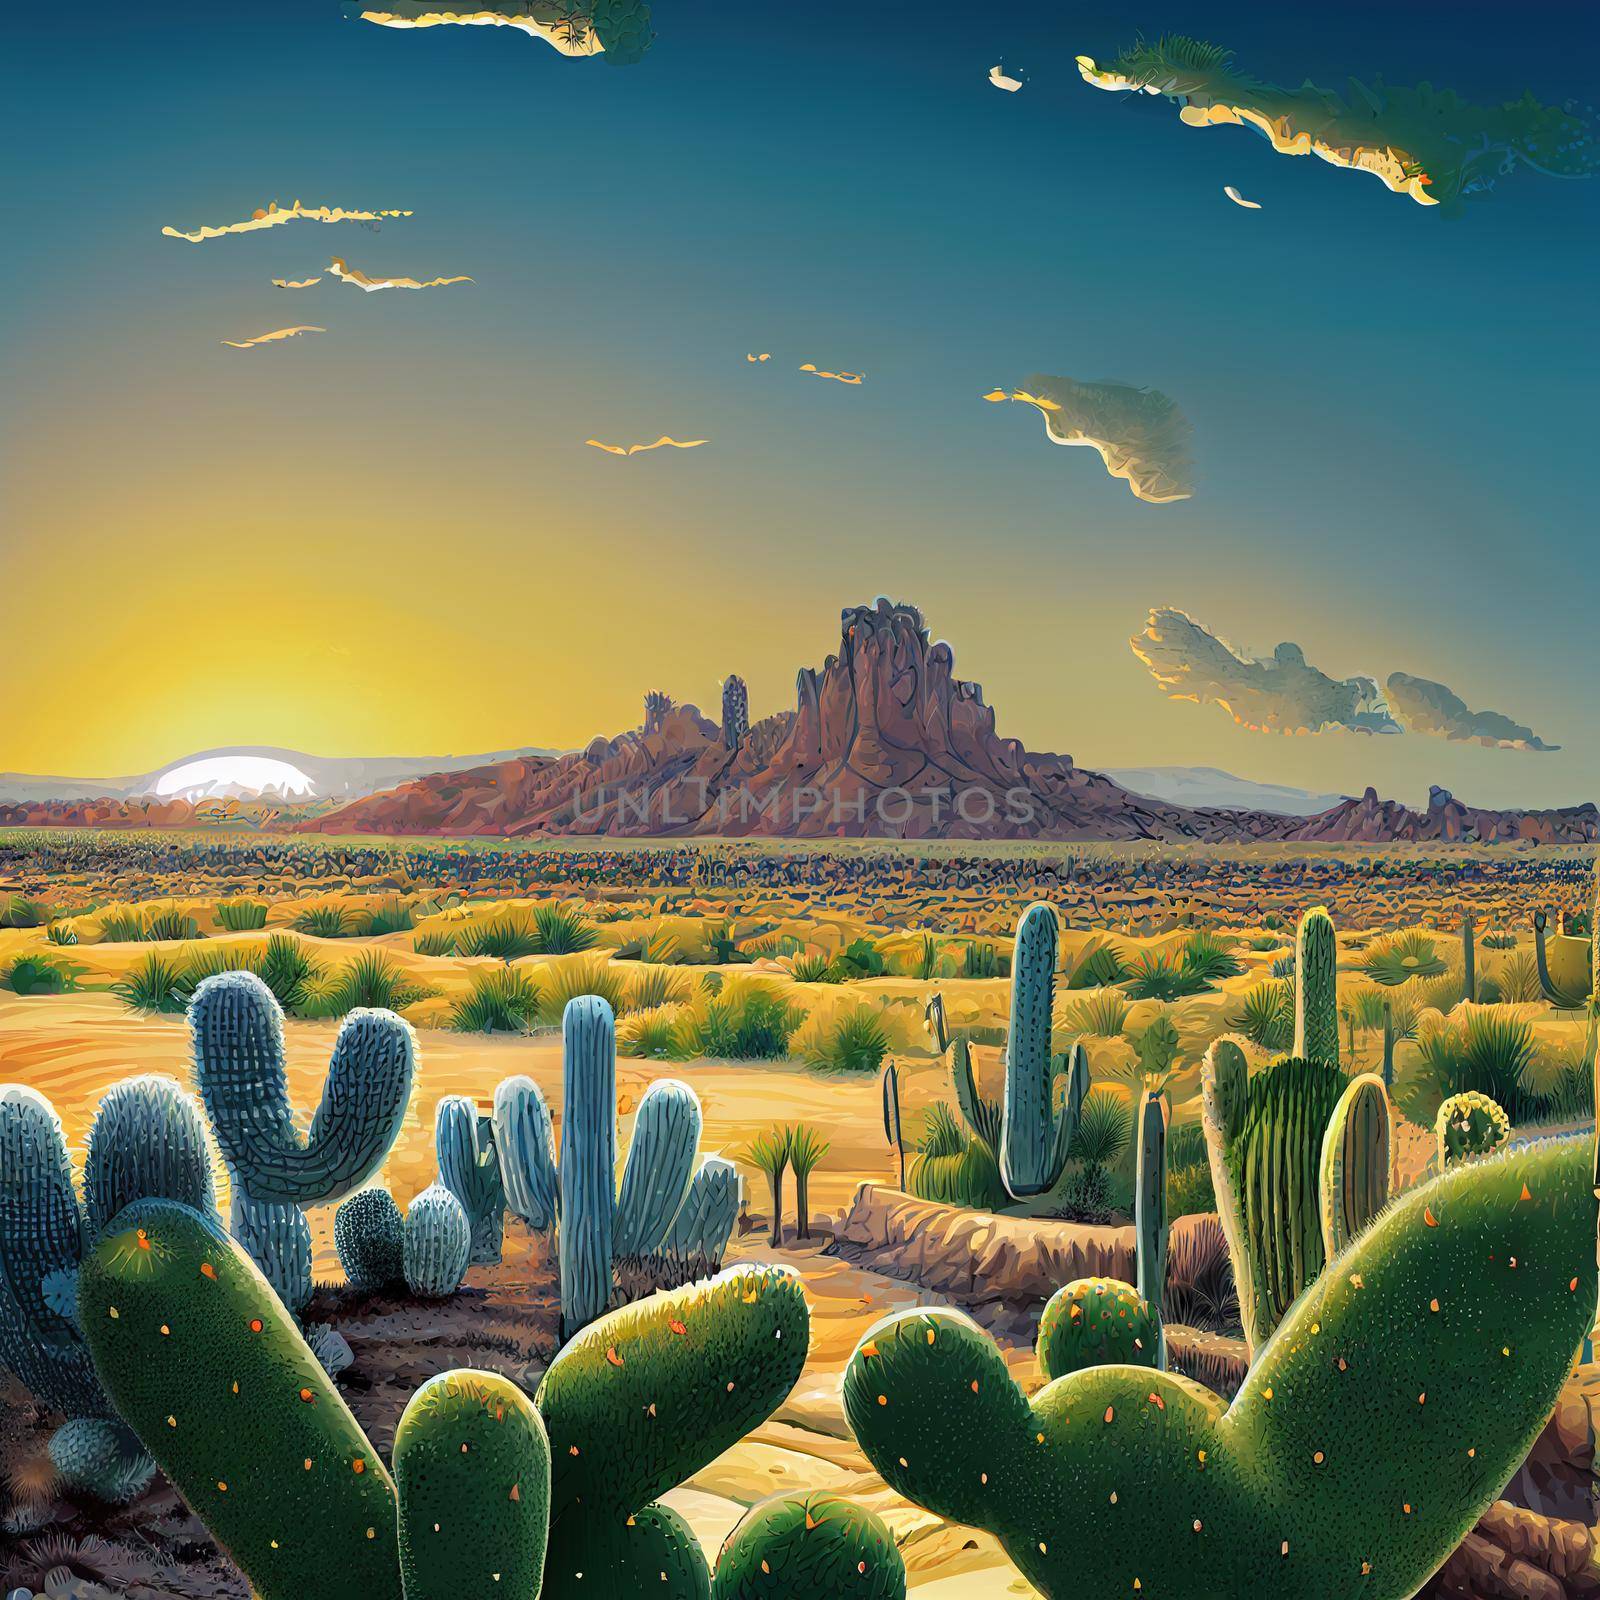 Desert and cactus landscape with sunset, cartoon style. High quality 3d illustration